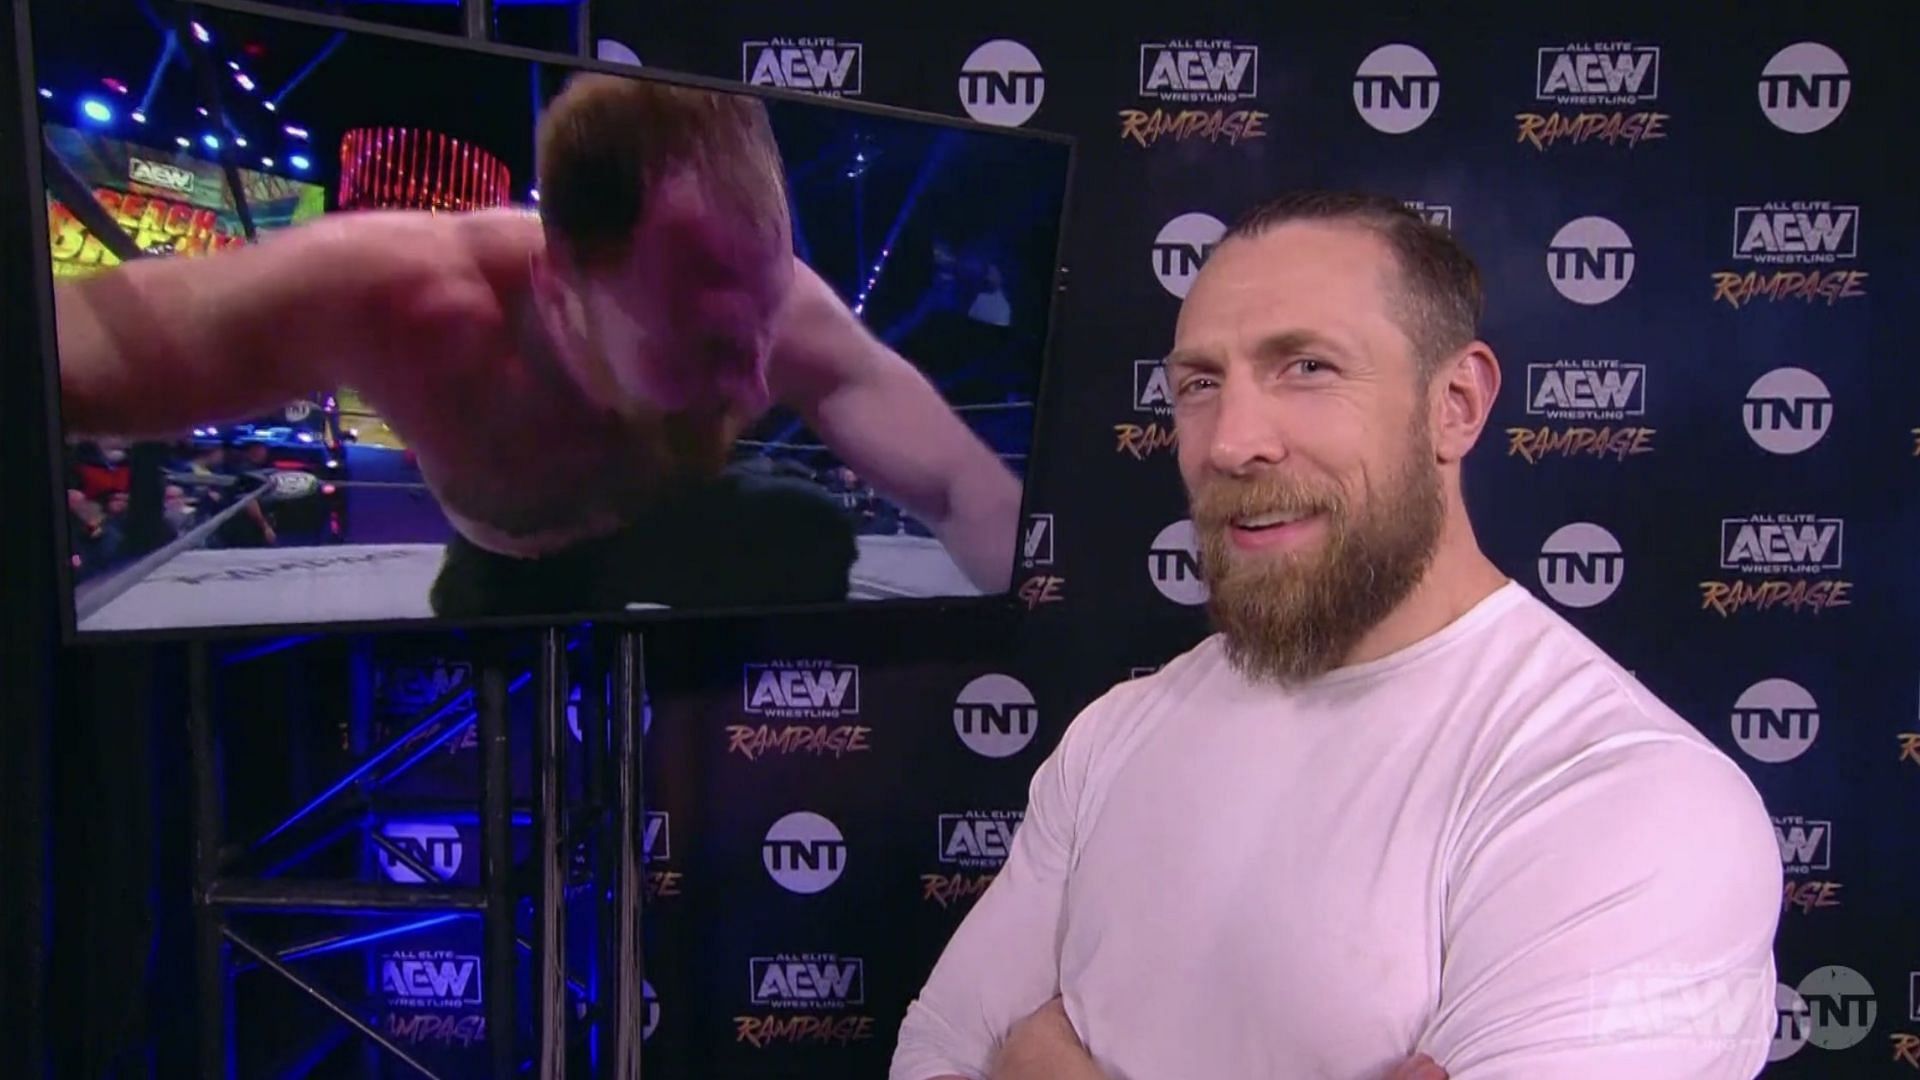 Bryan Danielson is backstage watching Jon Moxley perform on AEW Rampage.